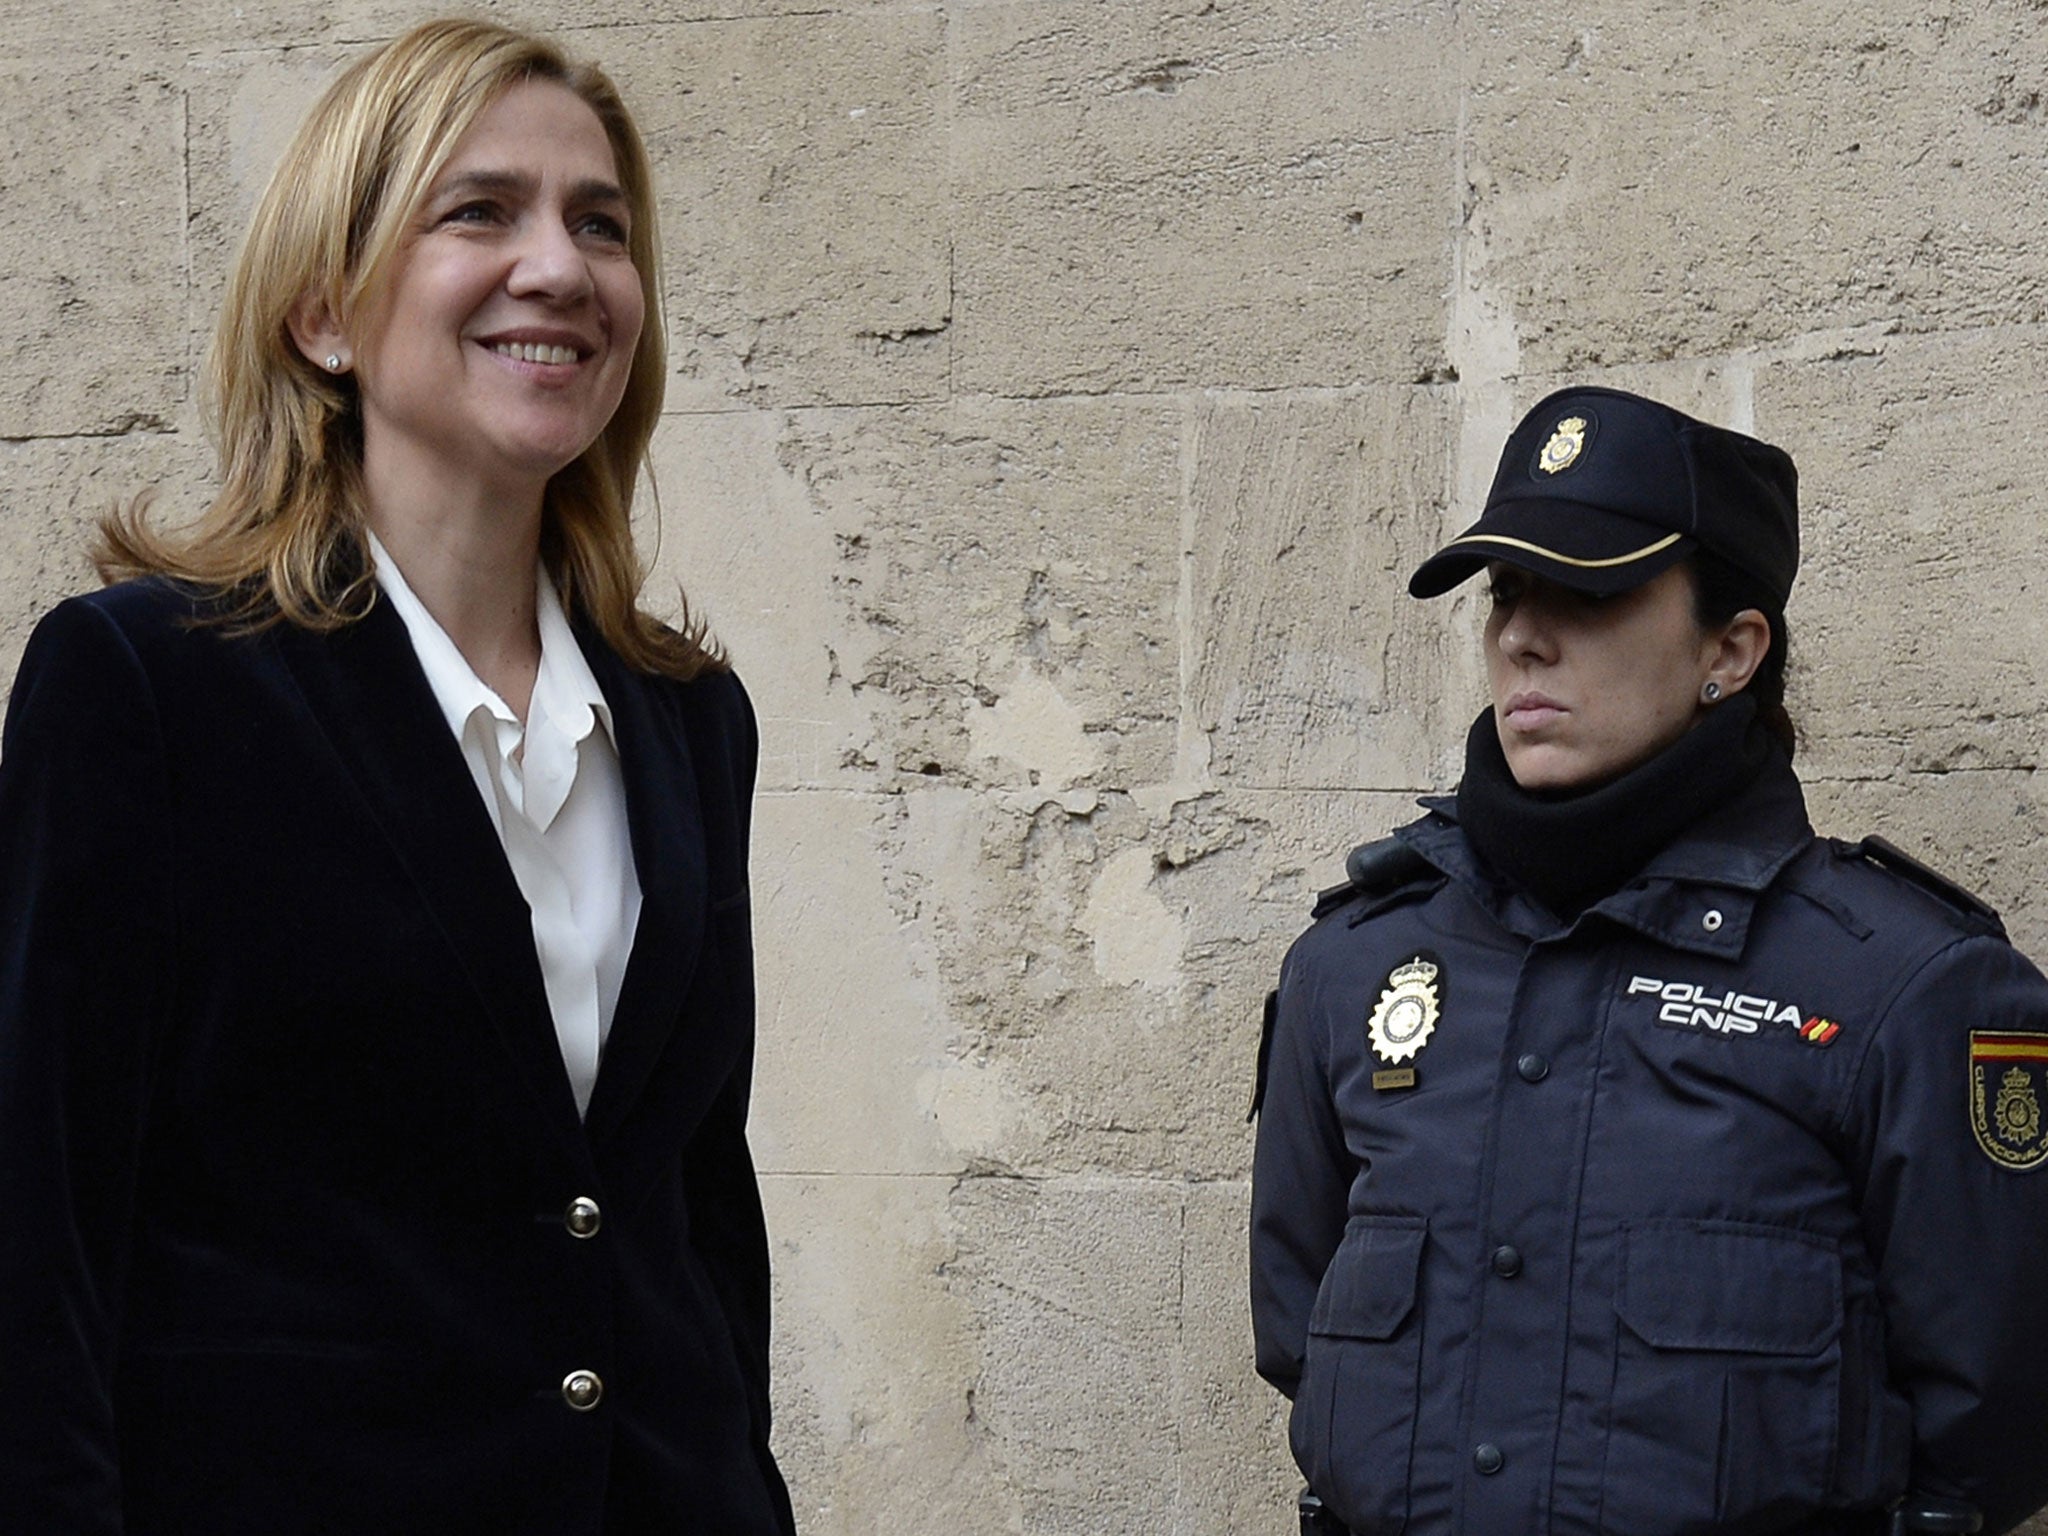 Cristina was indicted as part of a four-year probe into her husband, Inaki Urdangarin